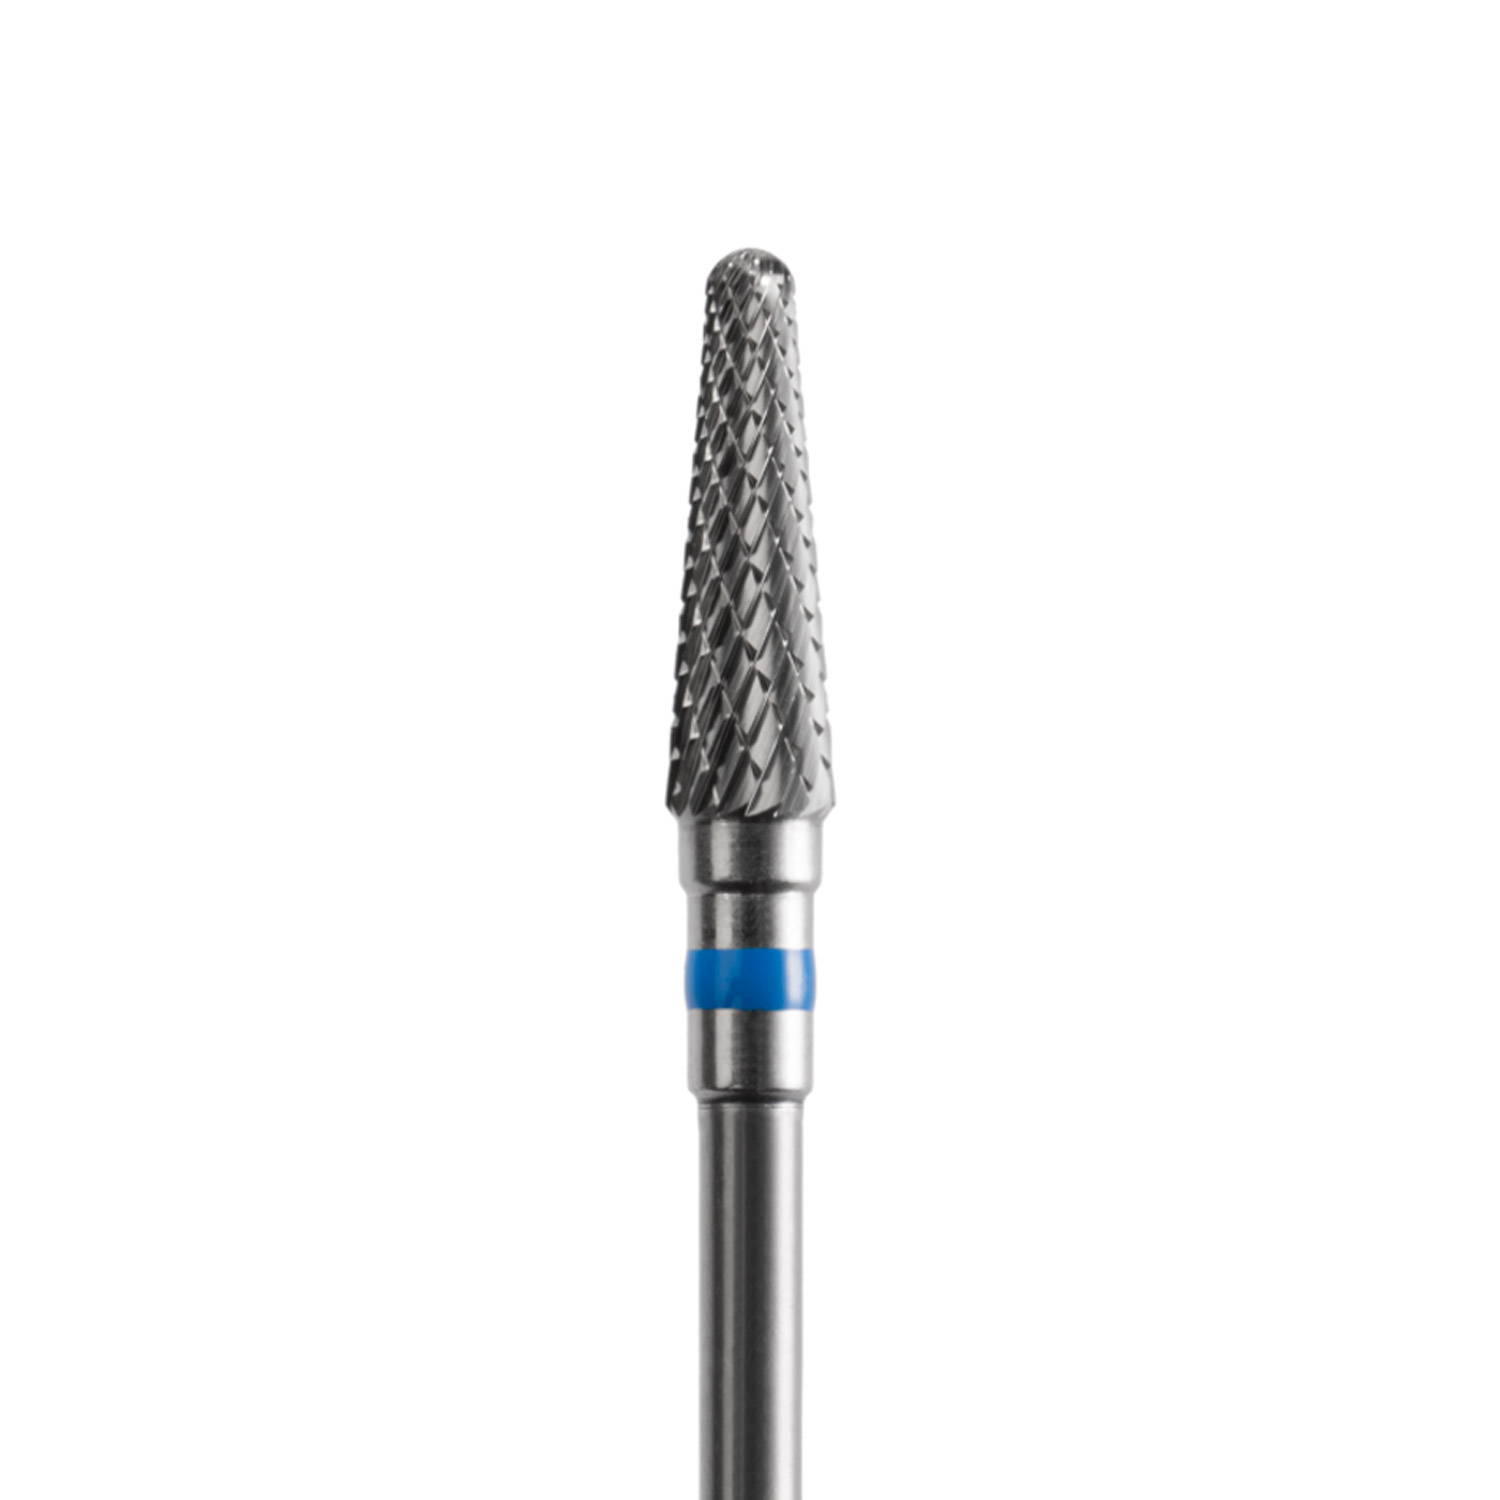 Acurata professional milling tool with moderate cross cut AC-62 ACURATA - 190 Series - Gel Removal